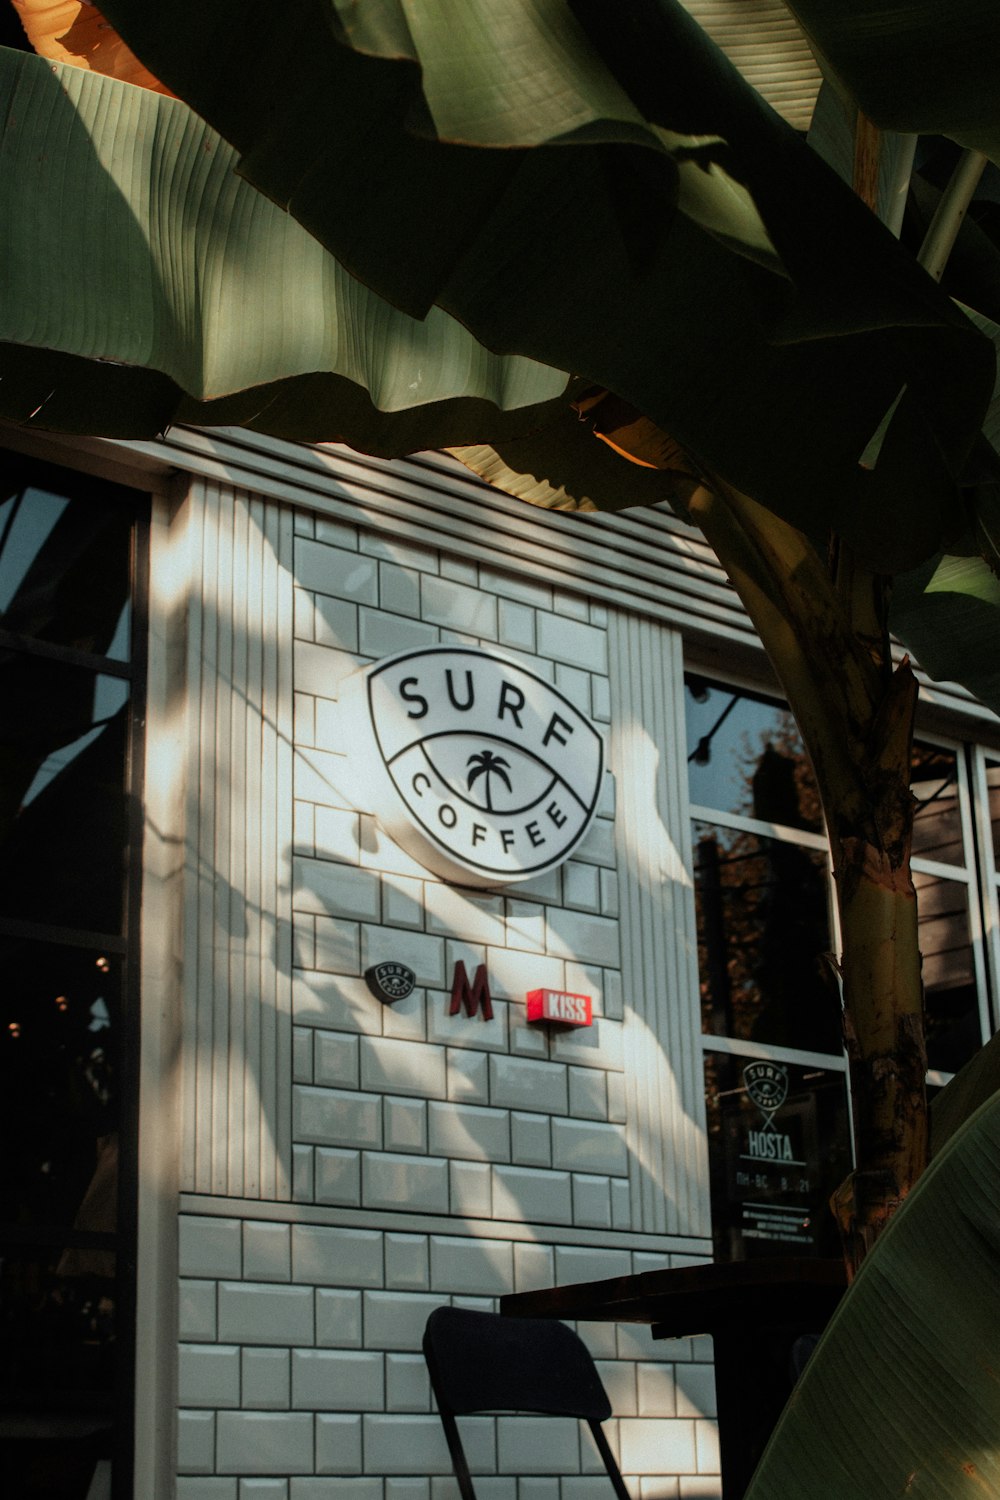 a white brick building with a surf coffee sign on it